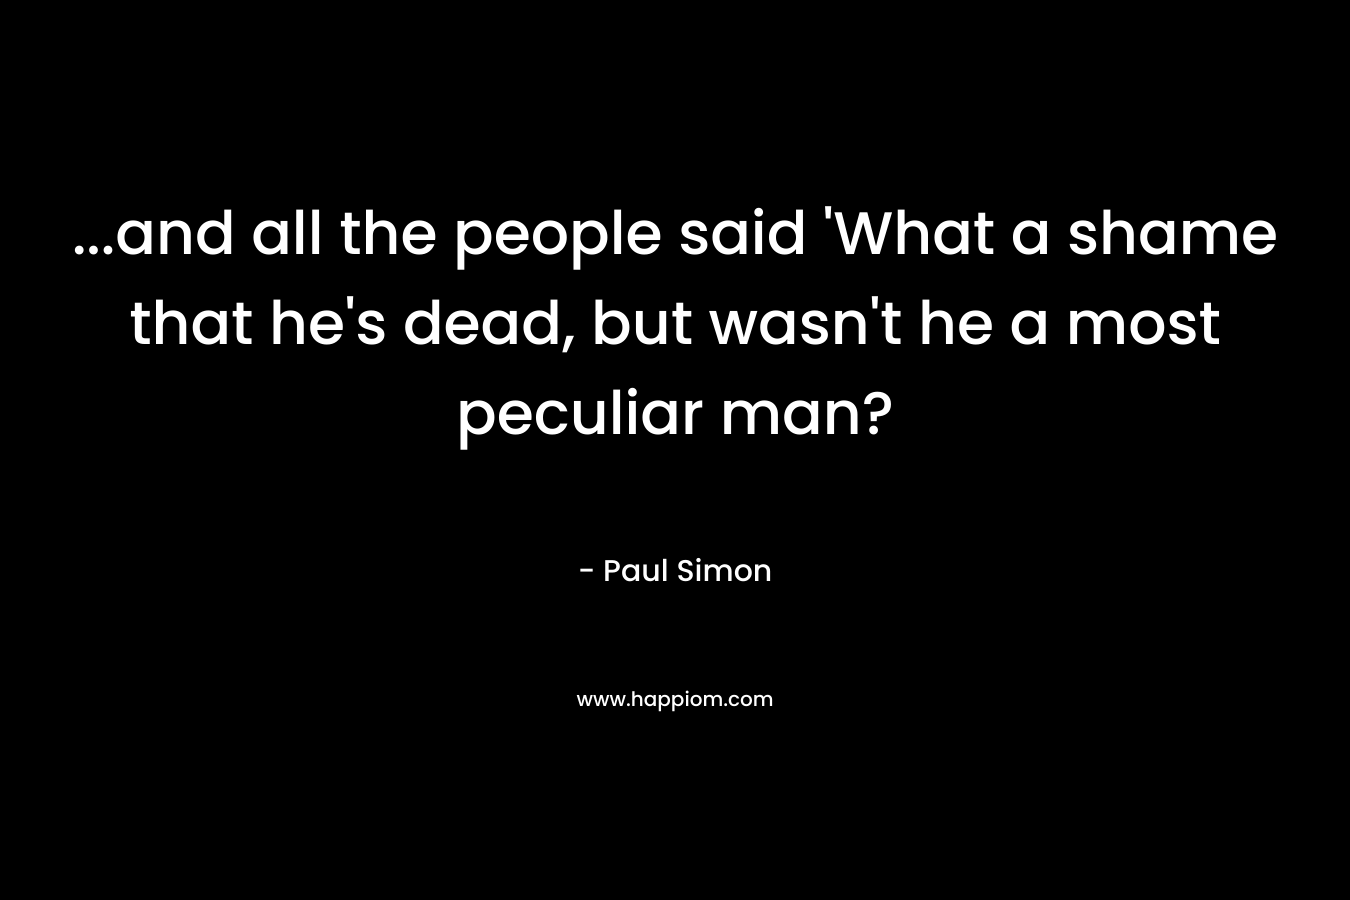 ...and all the people said 'What a shame that he's dead, but wasn't he a most peculiar man?